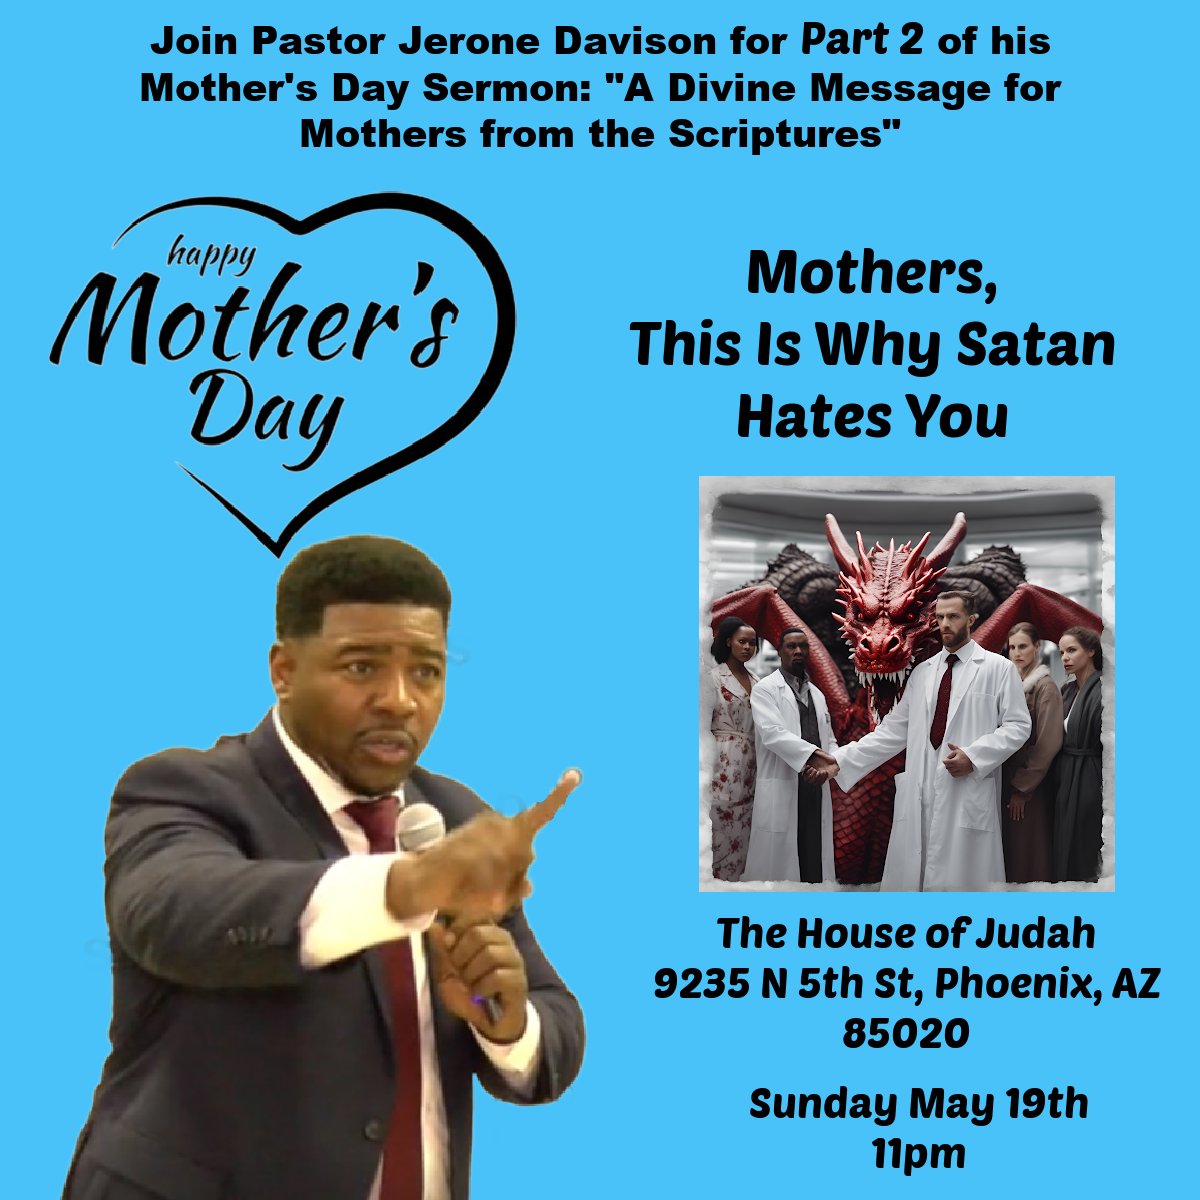 I will be preaching at my home Church this Sunday. Please make plans to join us for Part 2 of my Mother's Day Sermon on 'Why Satan Hates The Woman' Gen 3:15 #JeroneDavisonforCongress #AzCd4